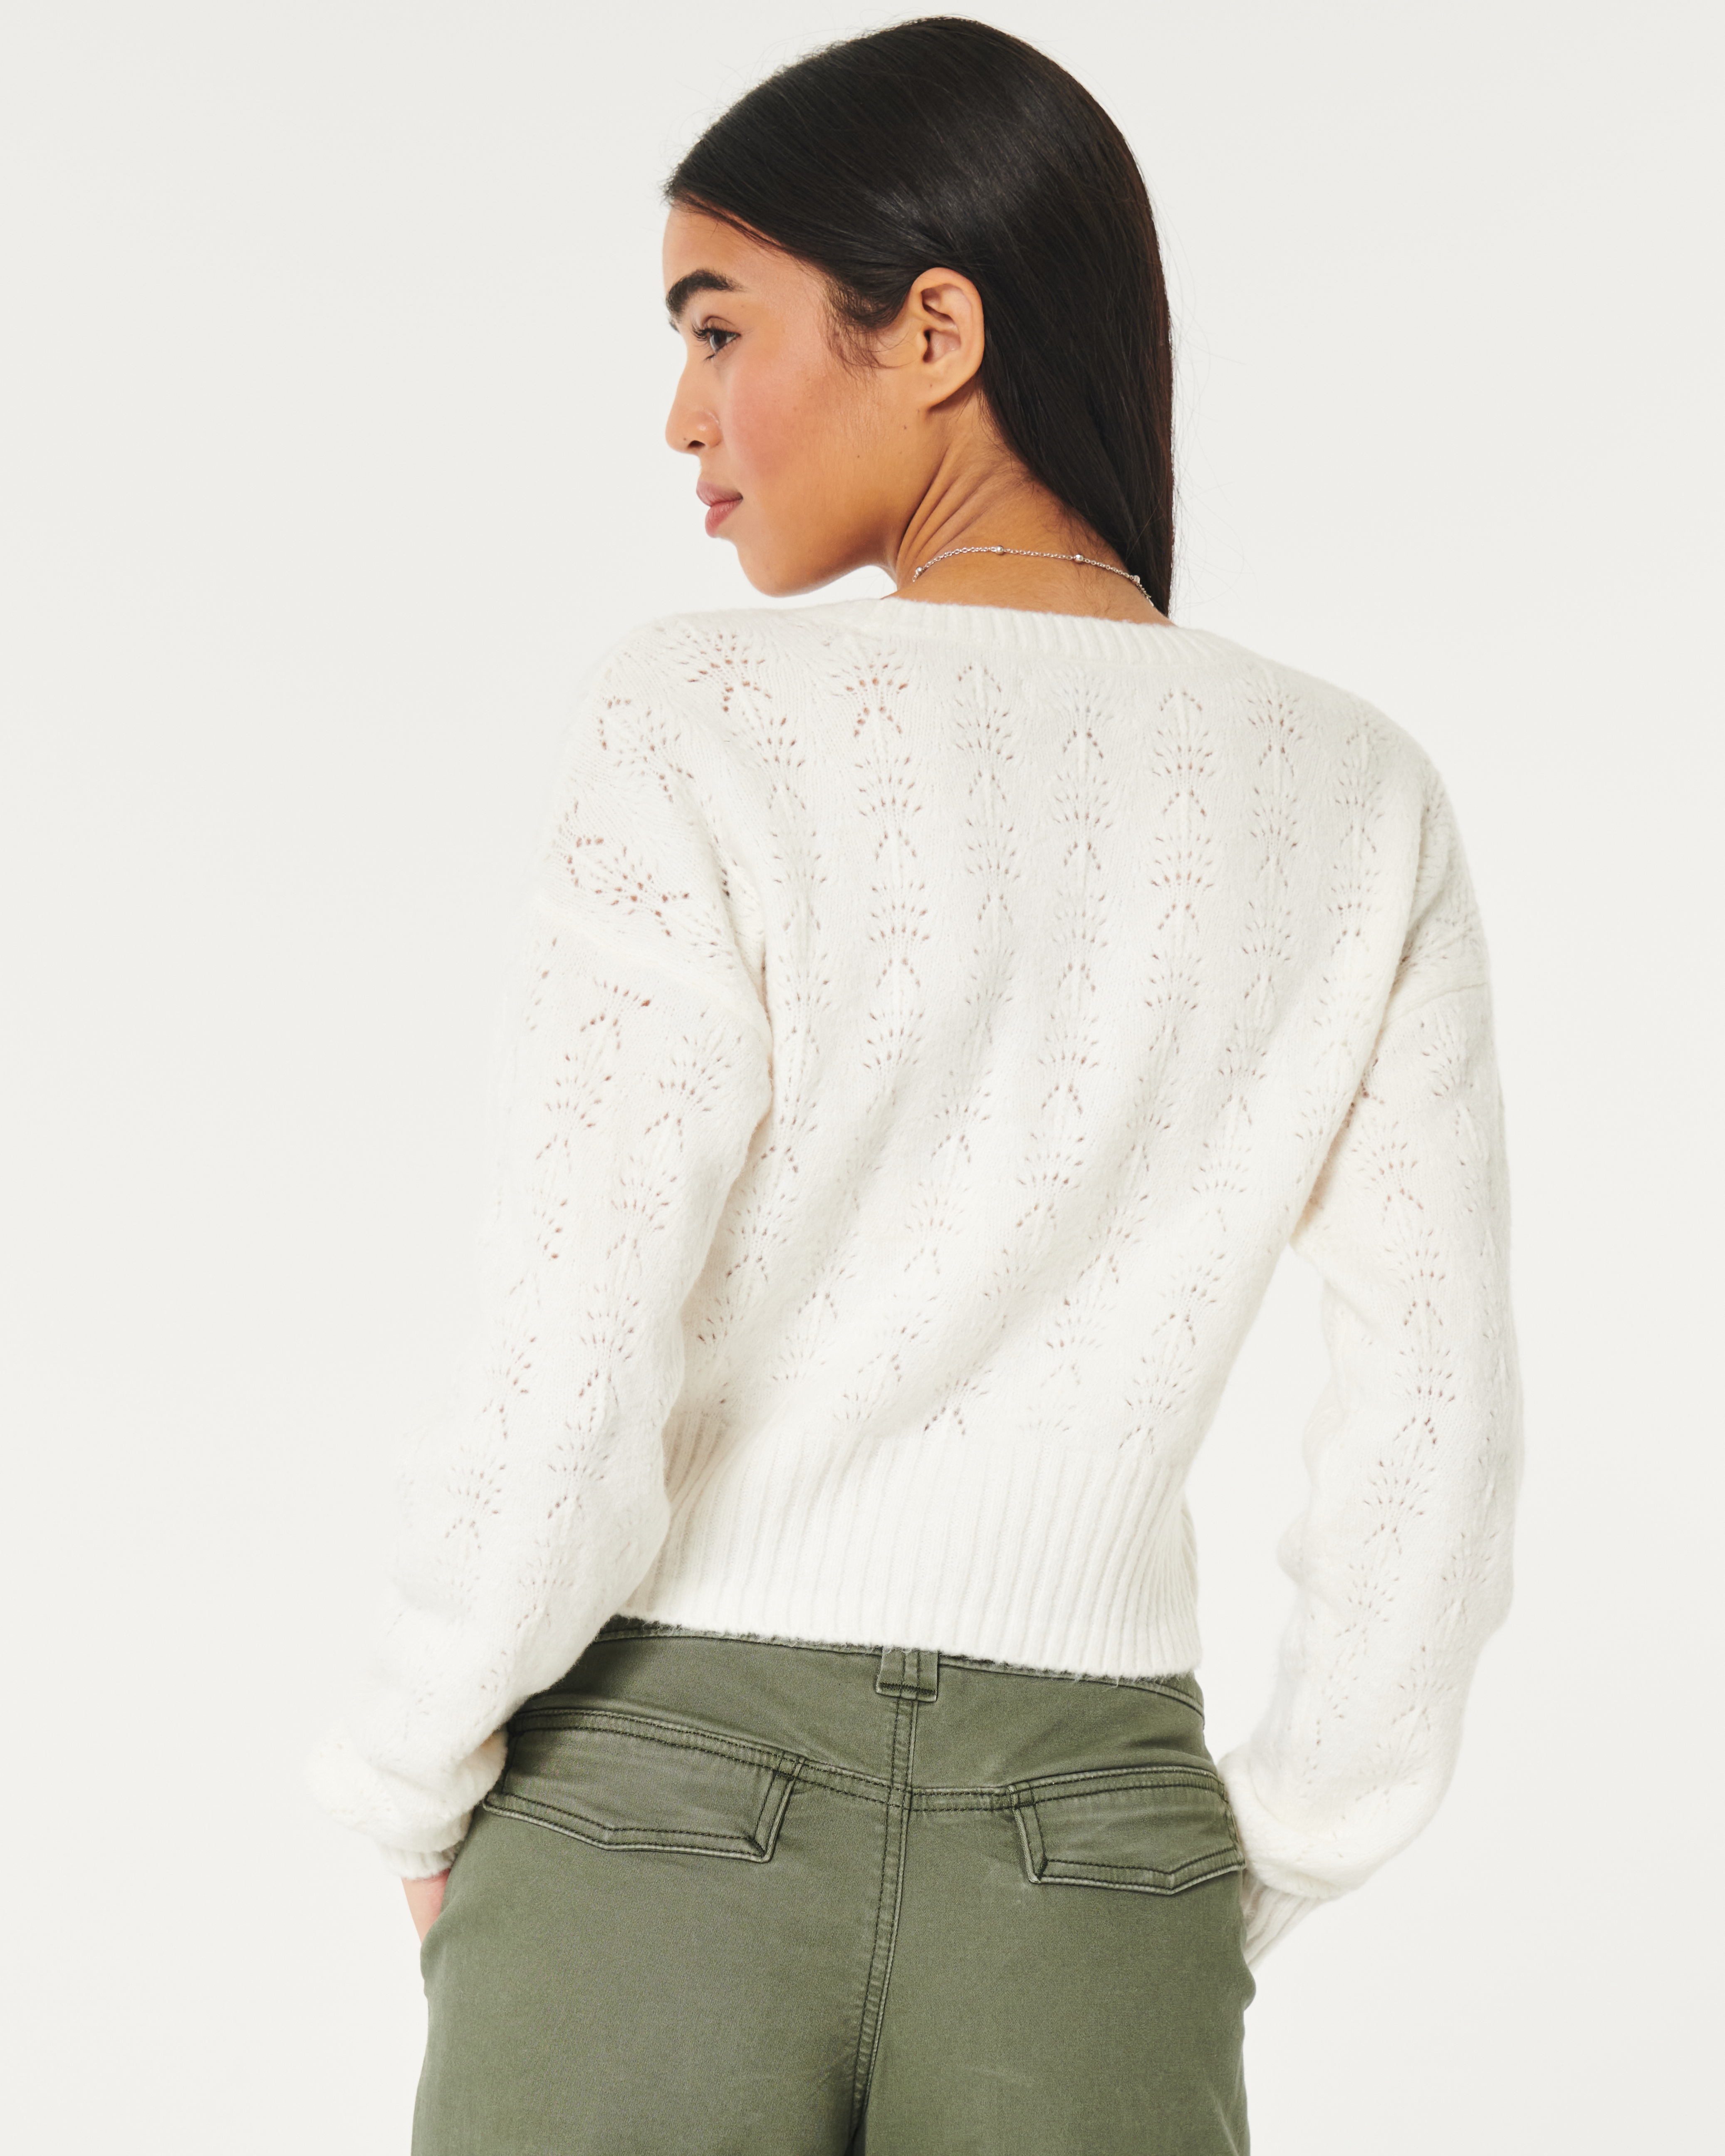 Hollister Women's Soft Knit Crop Sweater or Cardigan How-8 (X